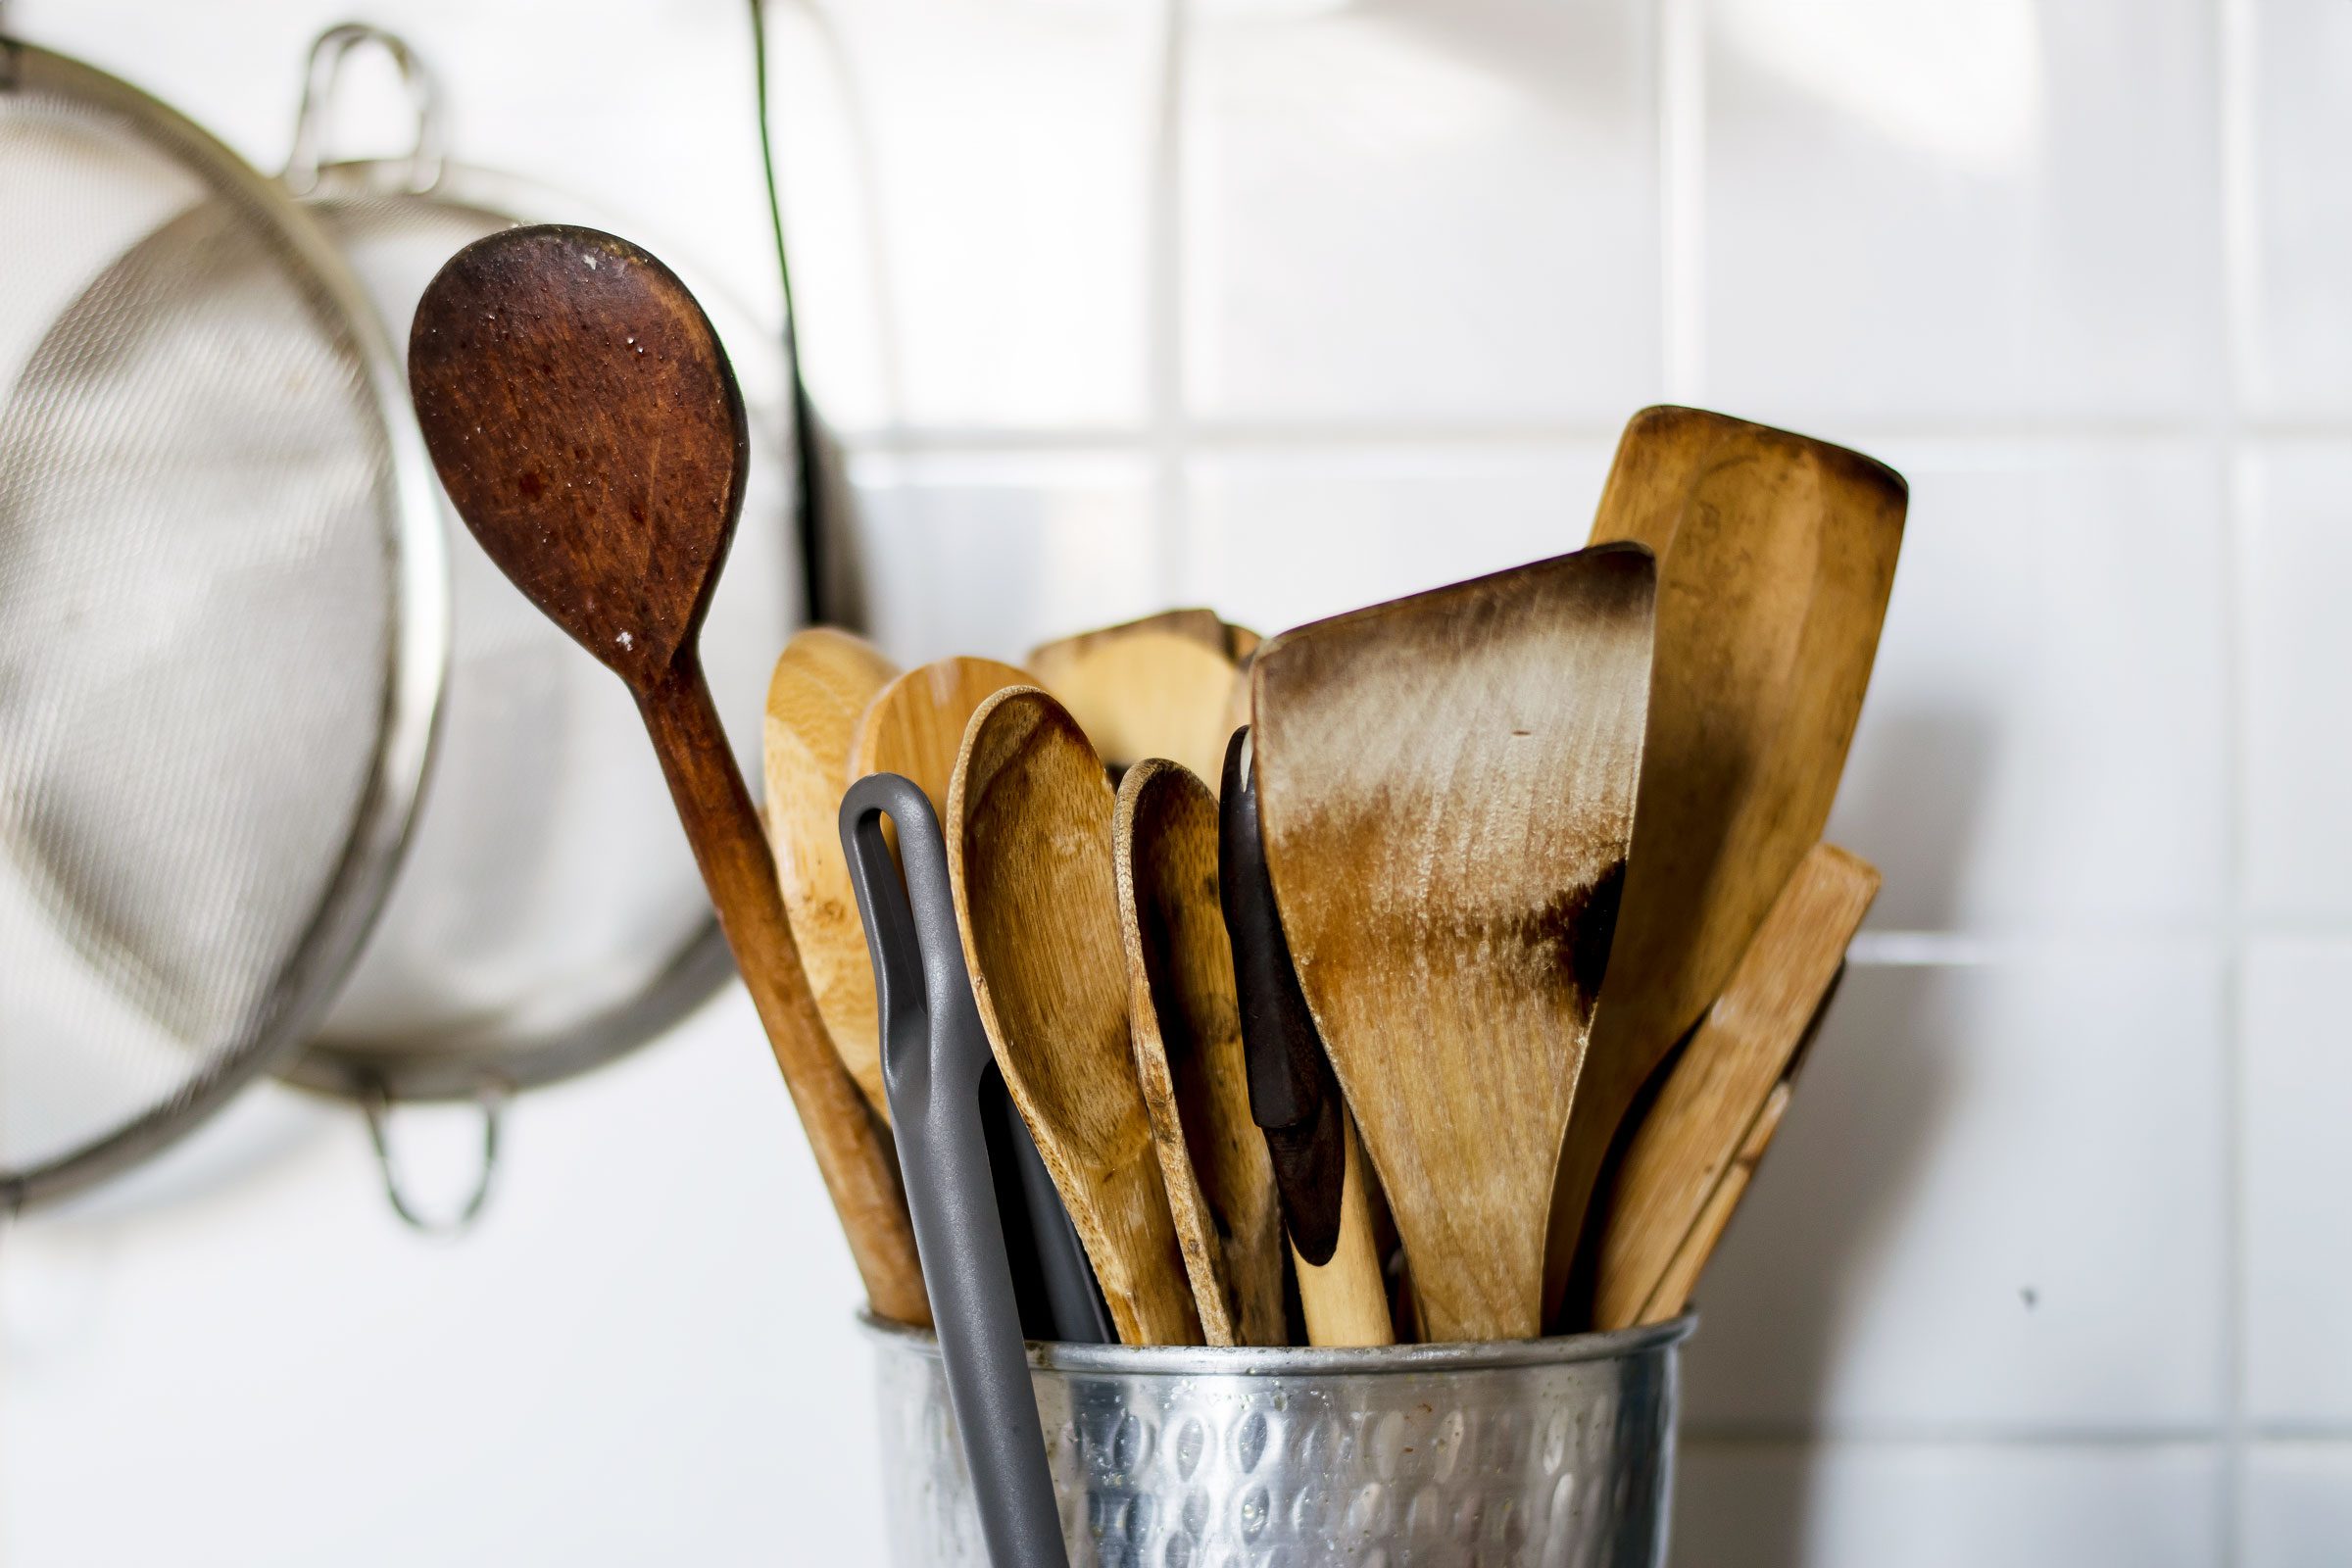 How to Clean a Wooden Spoon Correctly